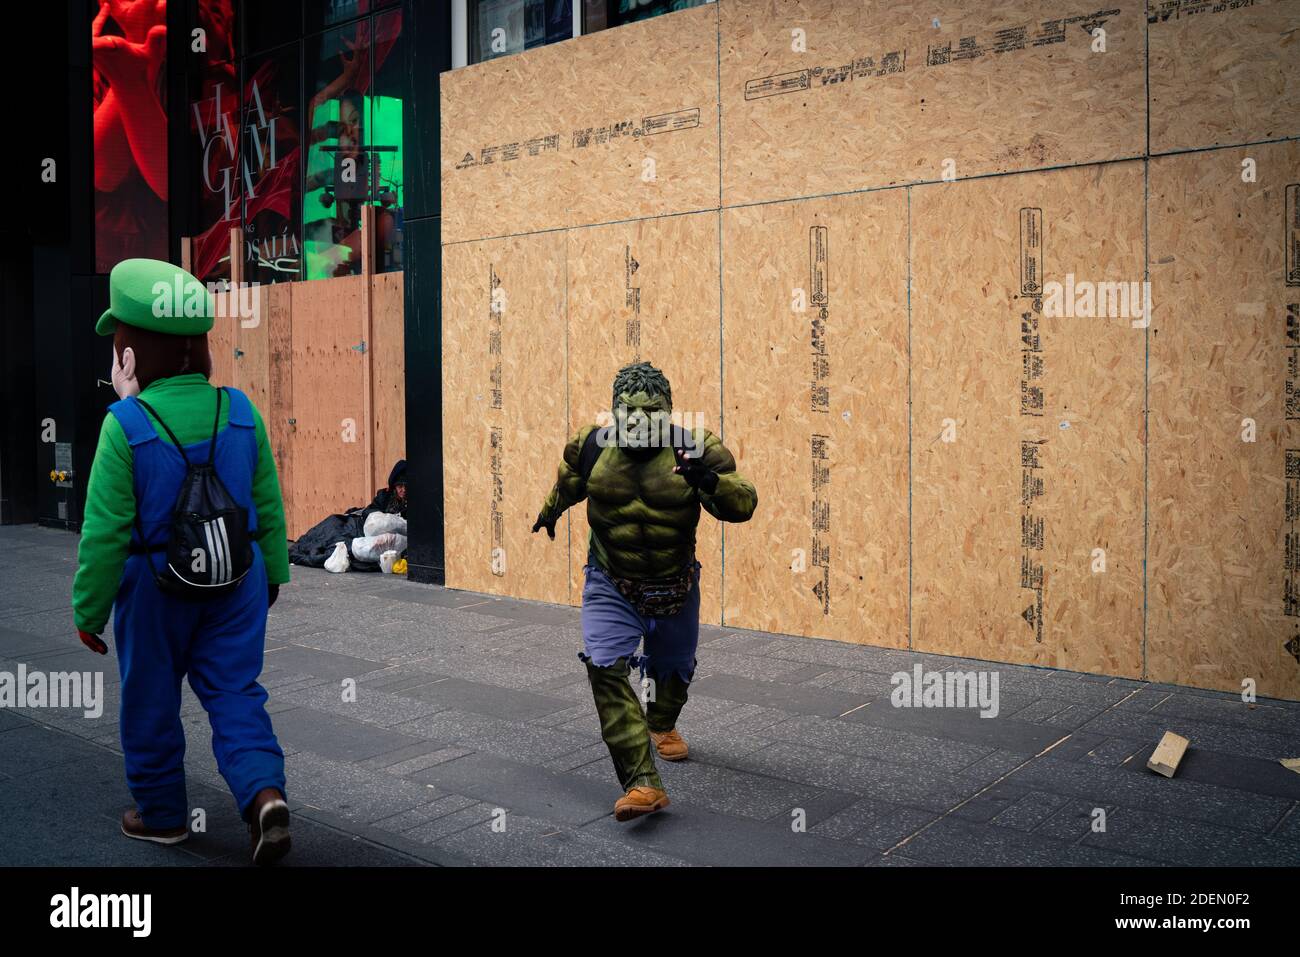 NEW YORK, UNITED STATES - Nov 03, 2020: A performer dressed as the Incredible Hulk charges at the camera in New York City's Times Square Stock Photo